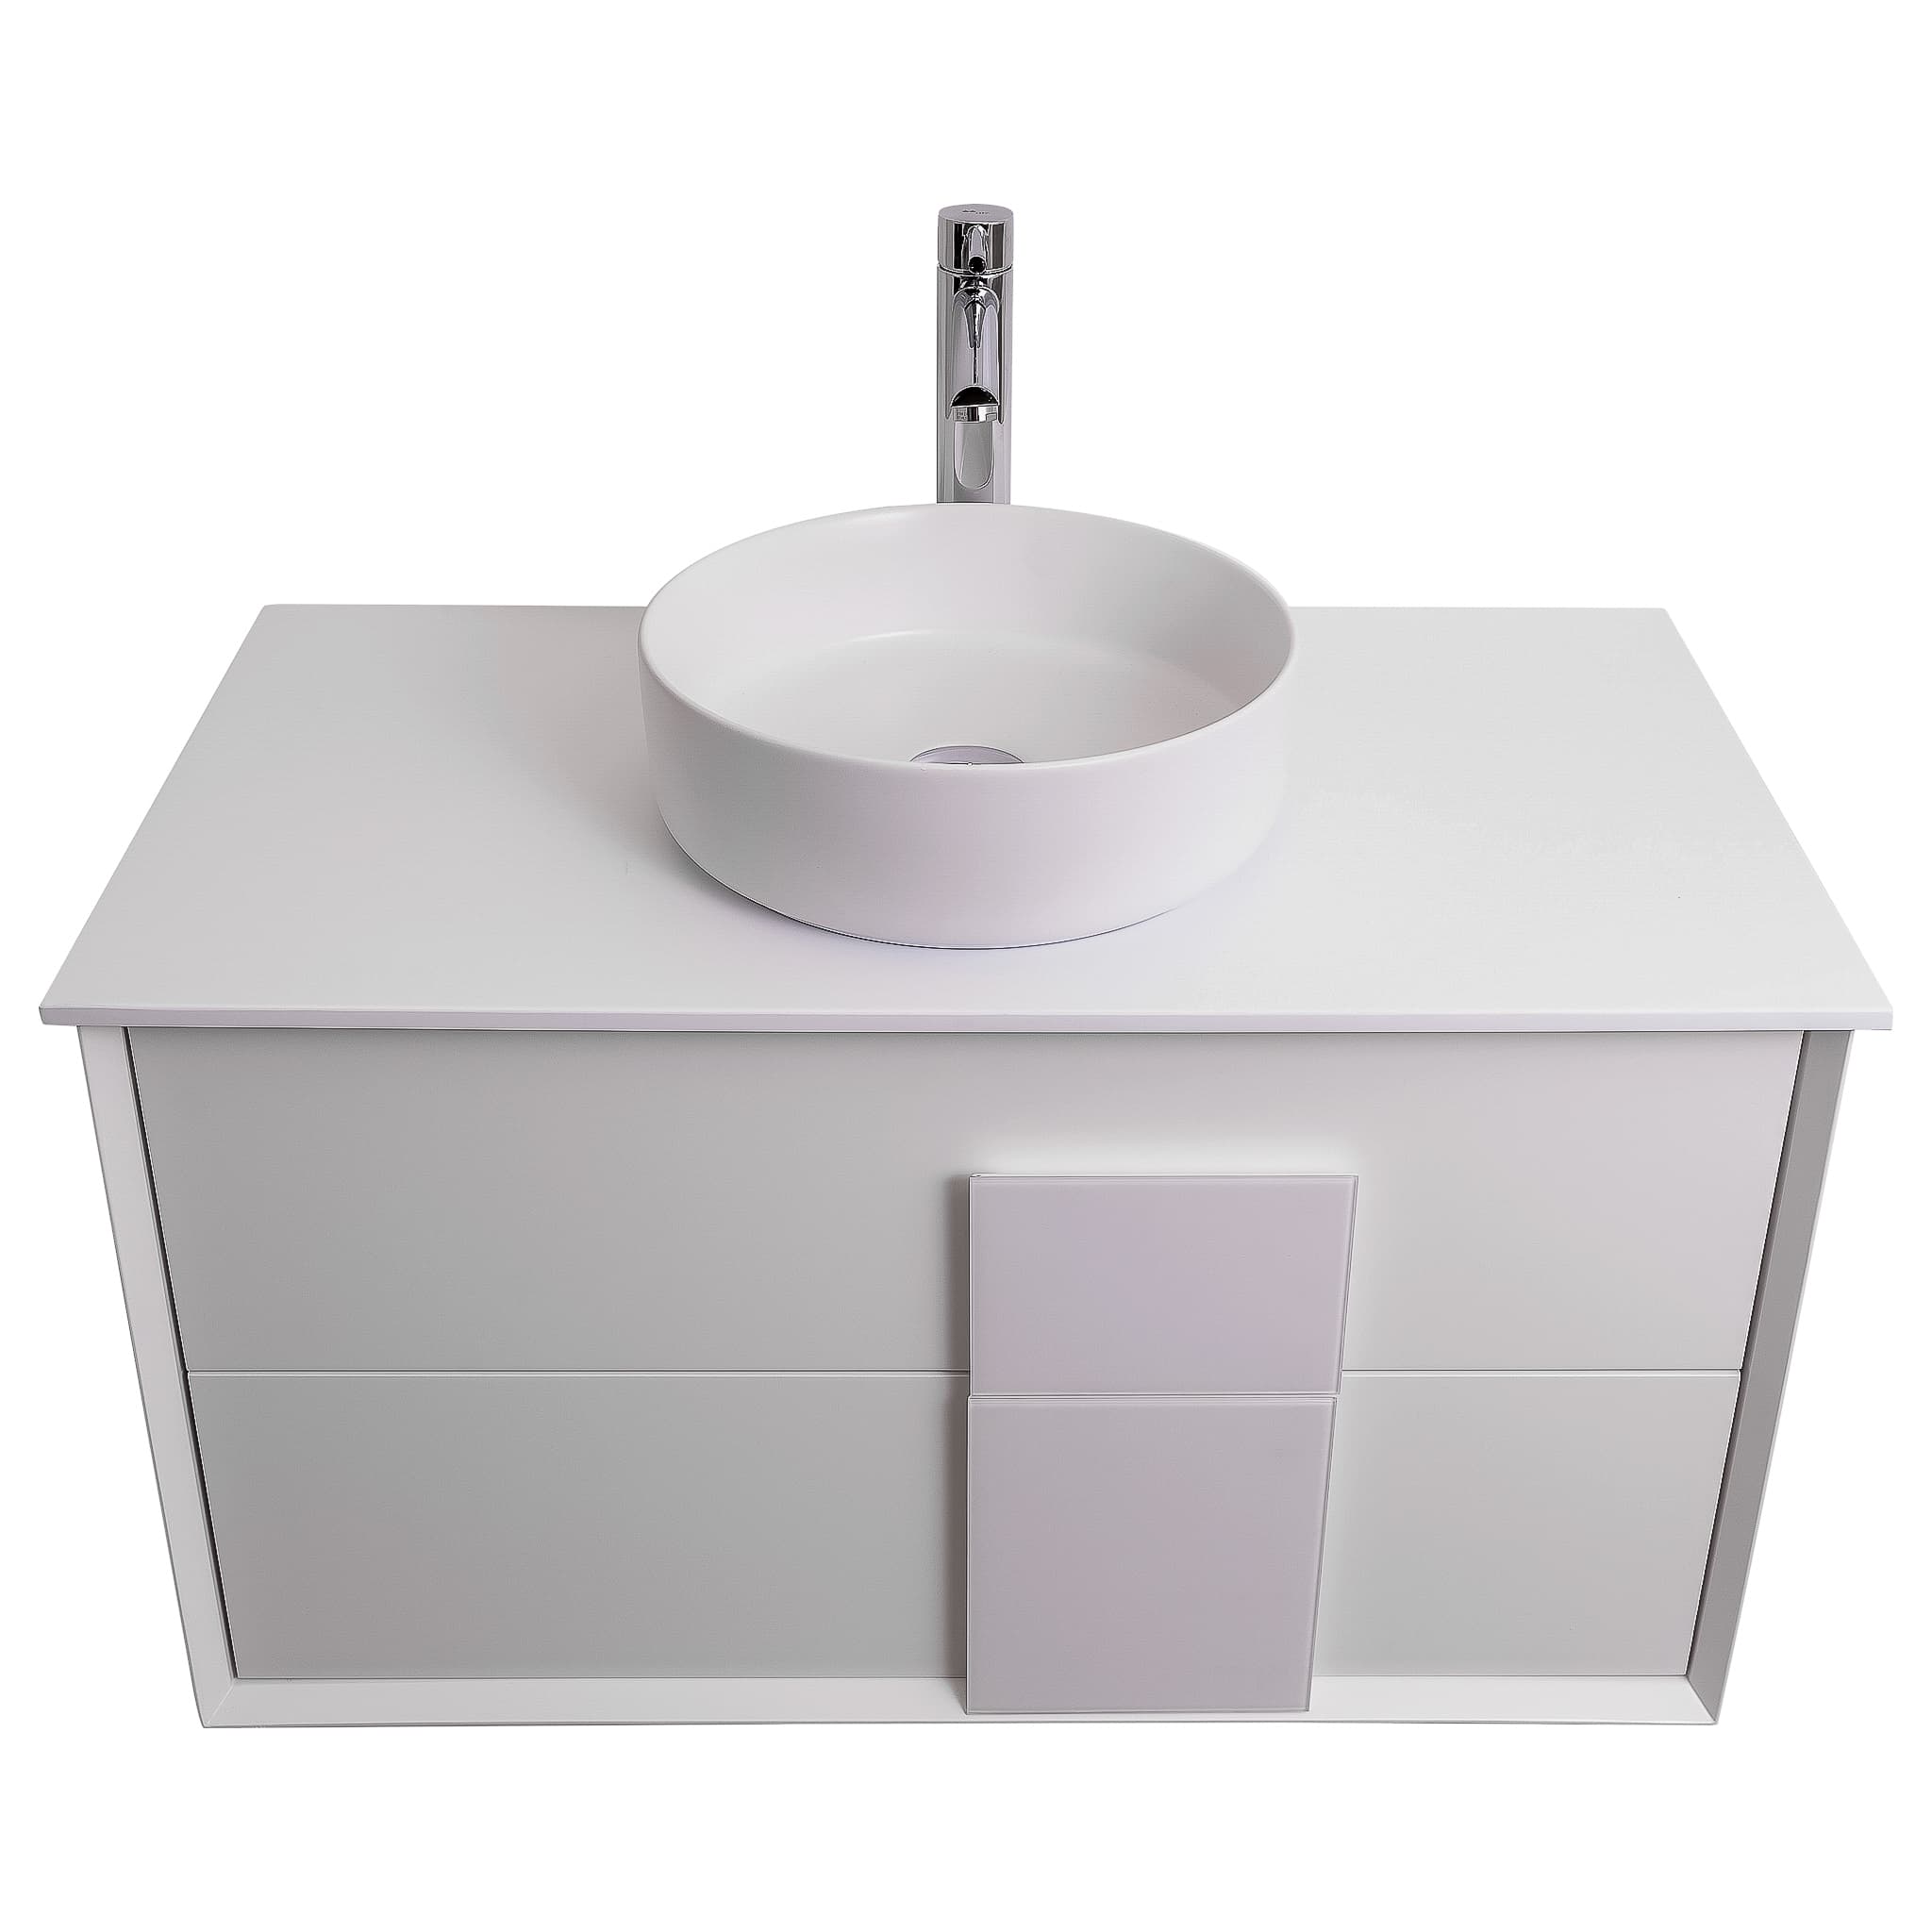 Piazza 31.5 Matte White With White Handle Cabinet, Ares White Top and Ares White Ceramic Basin, Wall Mounted Modern Vanity Set